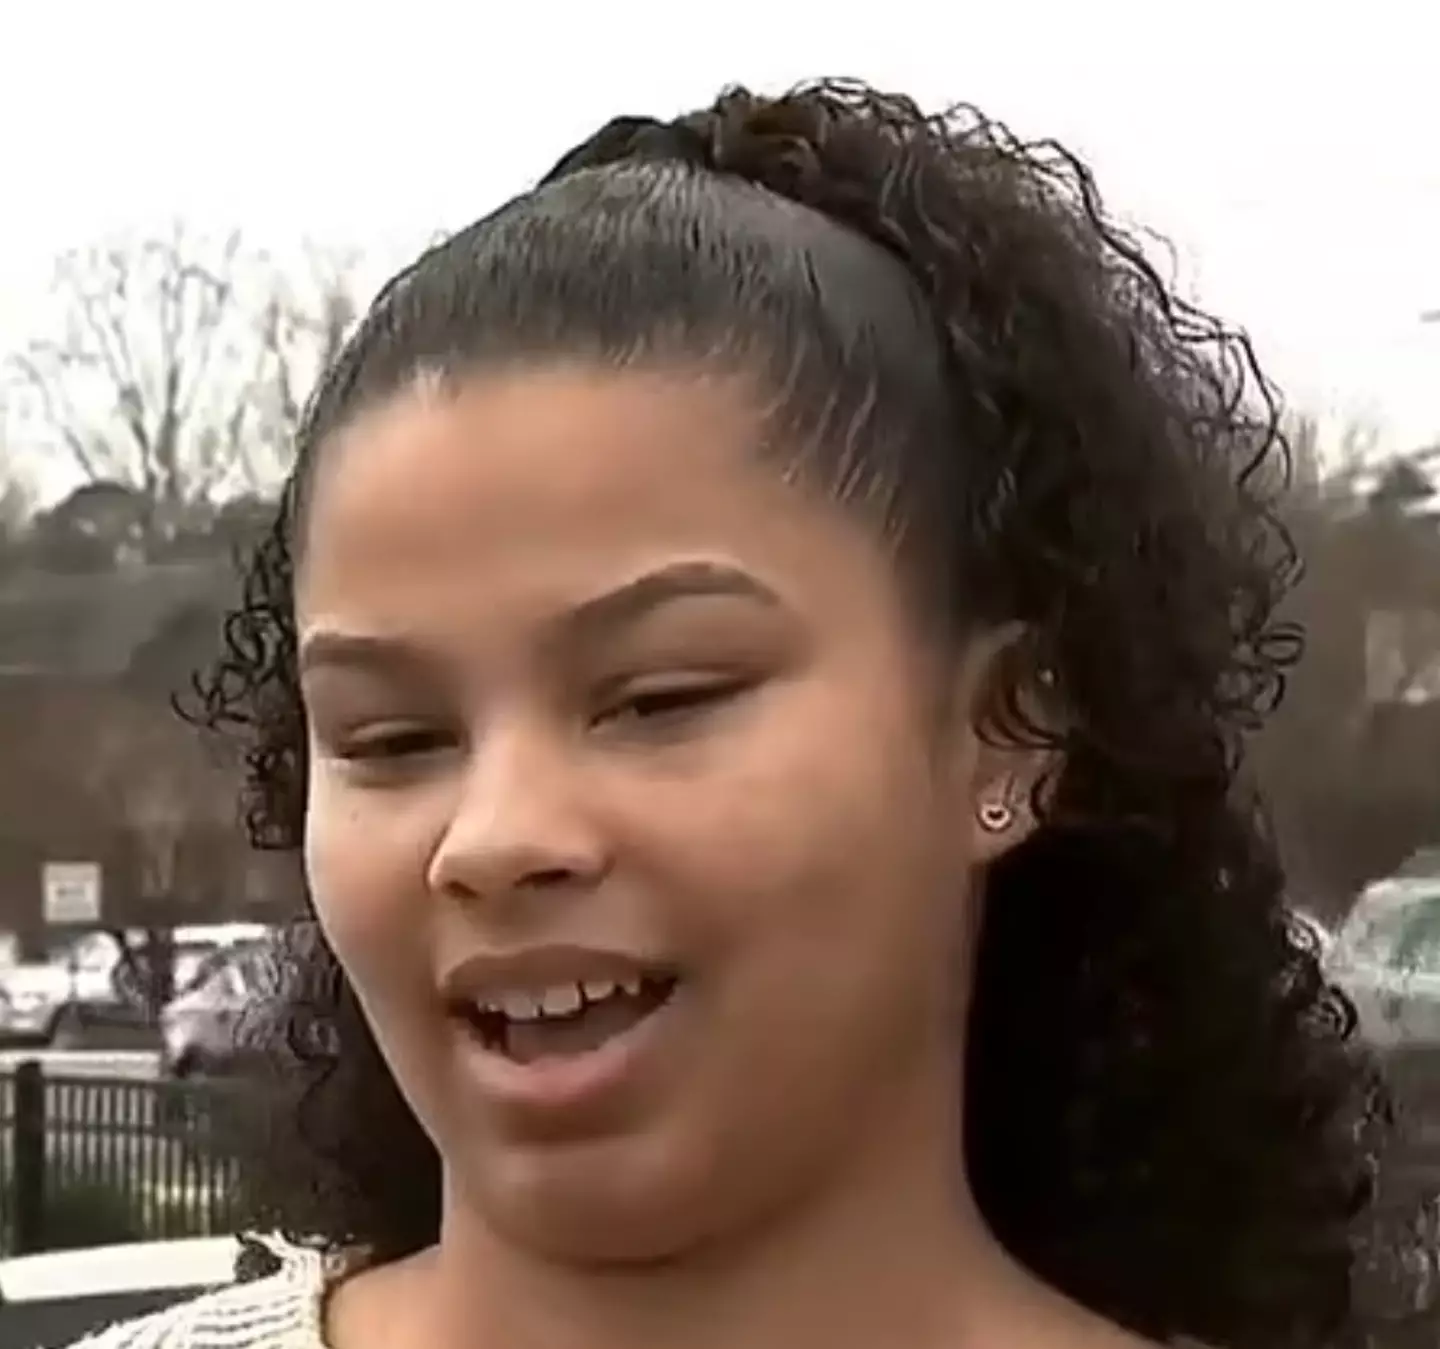 Nyiashia Jackson was disgusted when she saw a racial slur on her receipt.